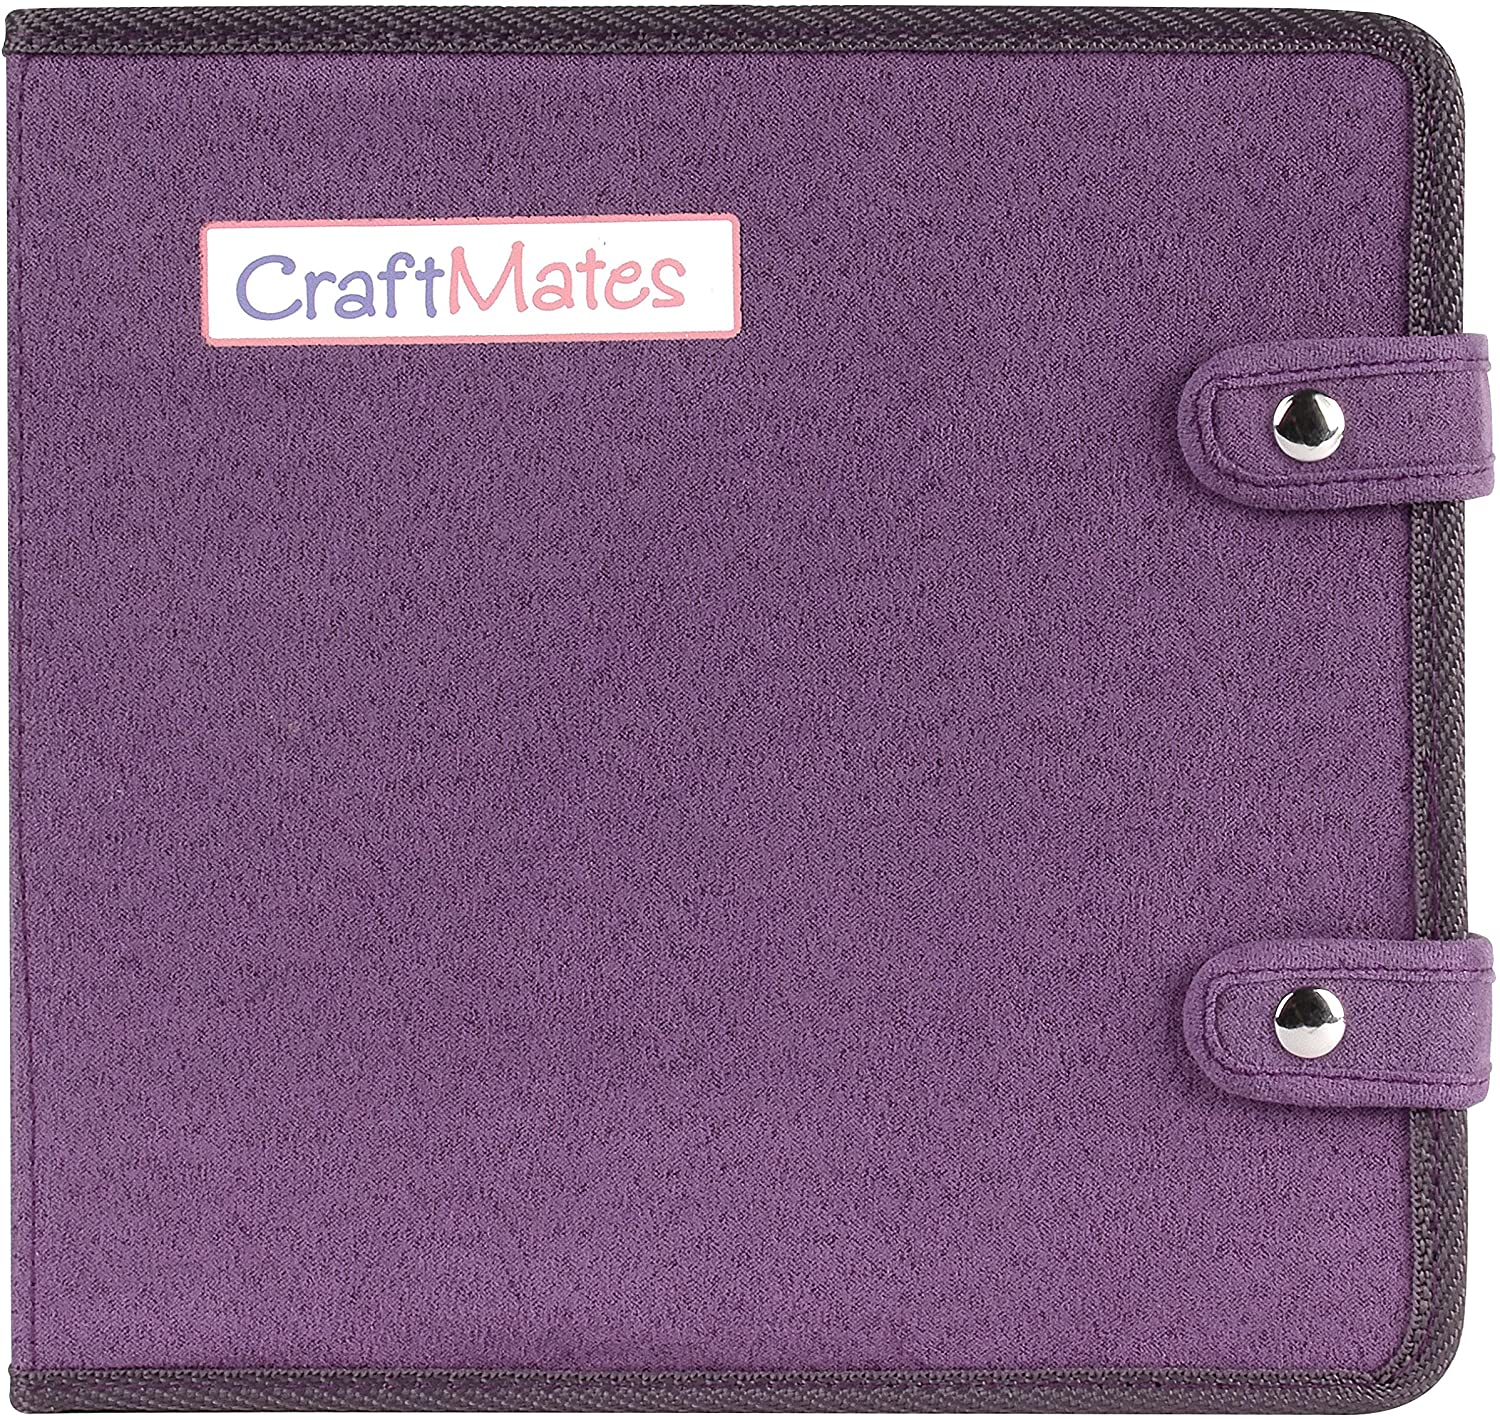 Travel Organizer For Medication  Craftmates Organizers – Apothecary  Products